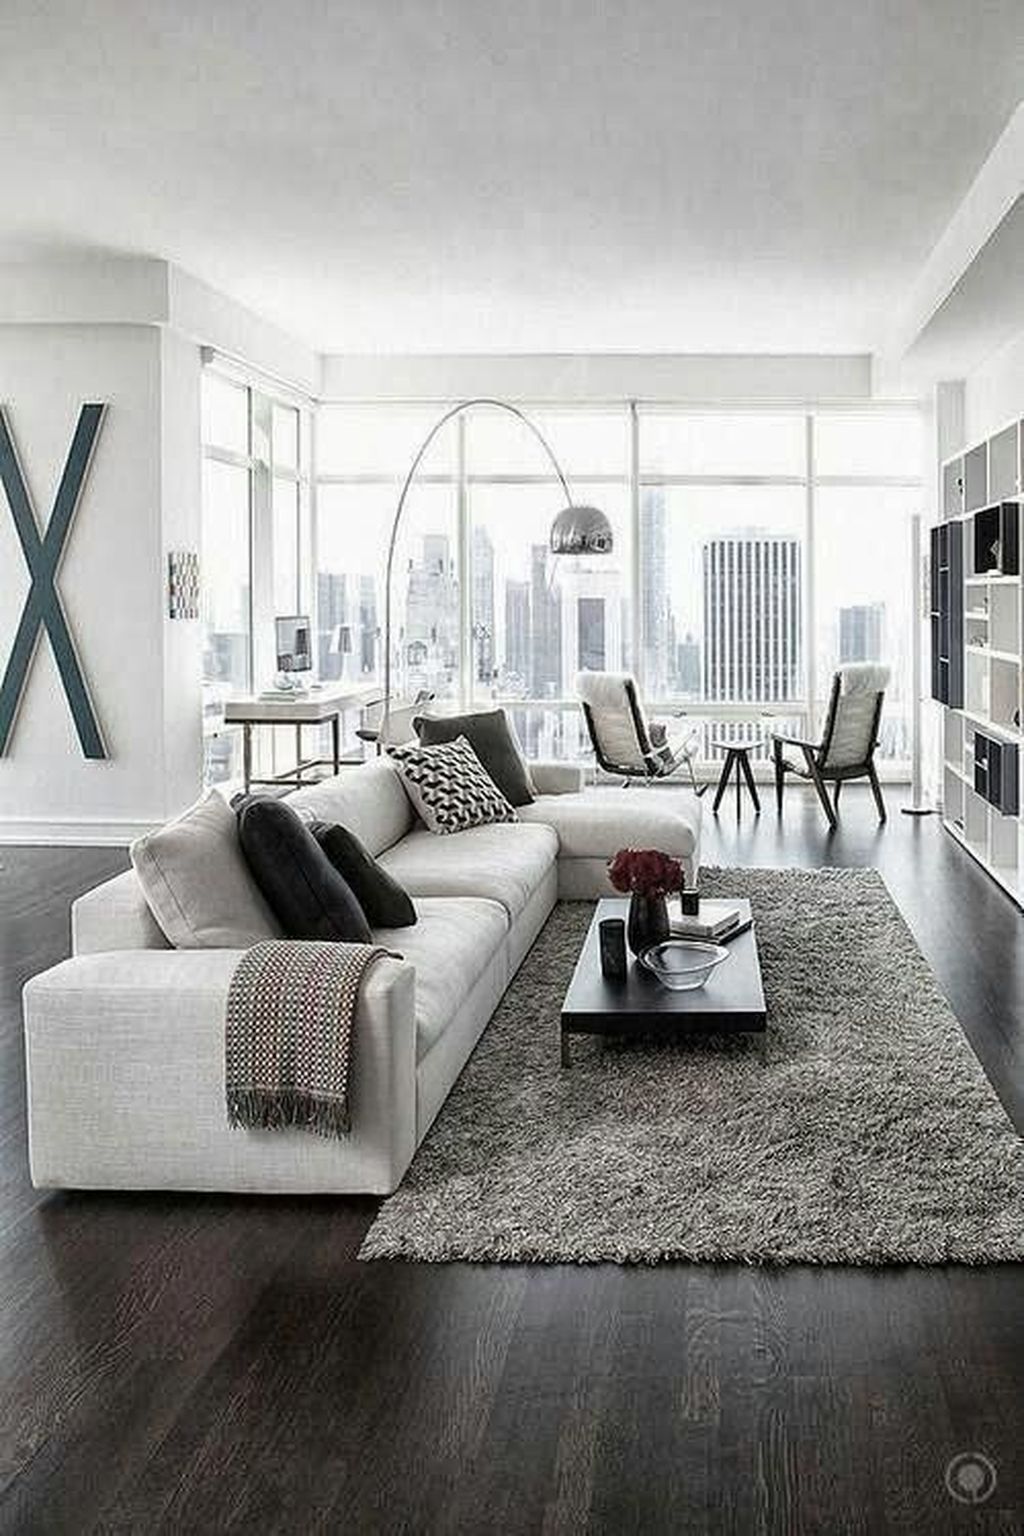 30 The Best Apartment Living Room Decor Ideas On A Budget - PIMPHOMEE